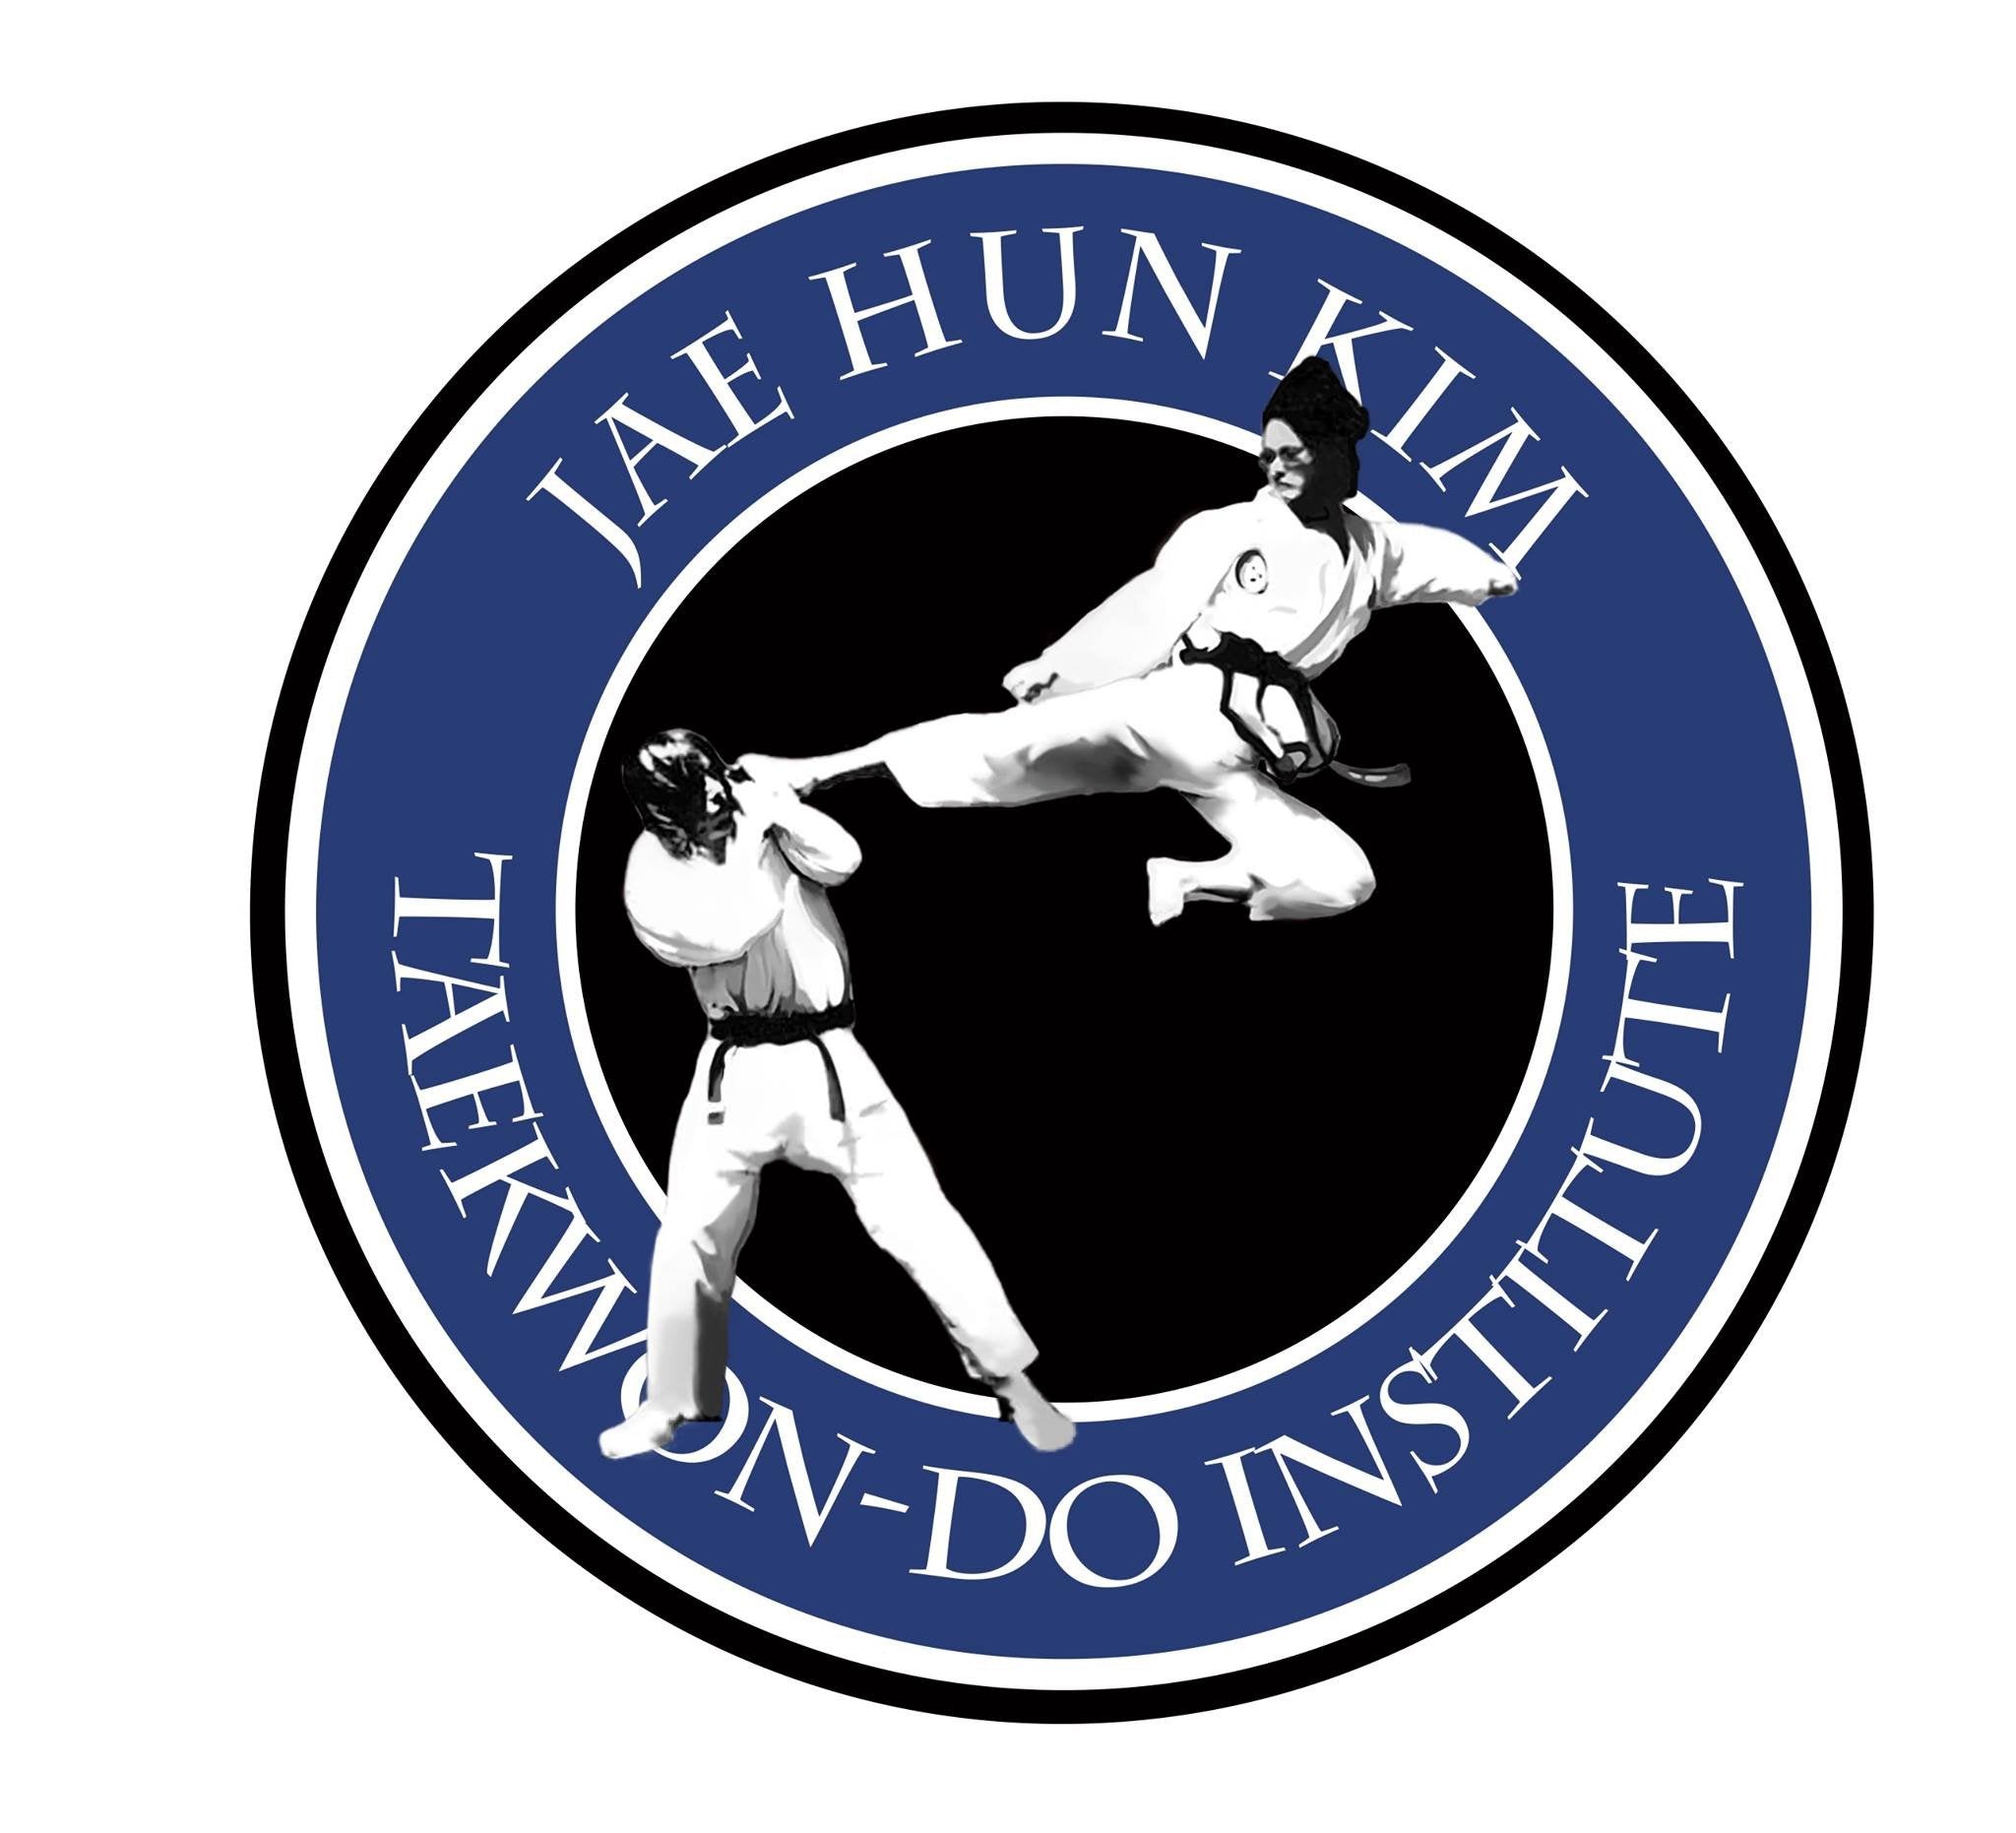 JH Kim Taekwondo Institute: Registration Fee Waiver with 1 Term Sign-Up eVoucher - BYKidO